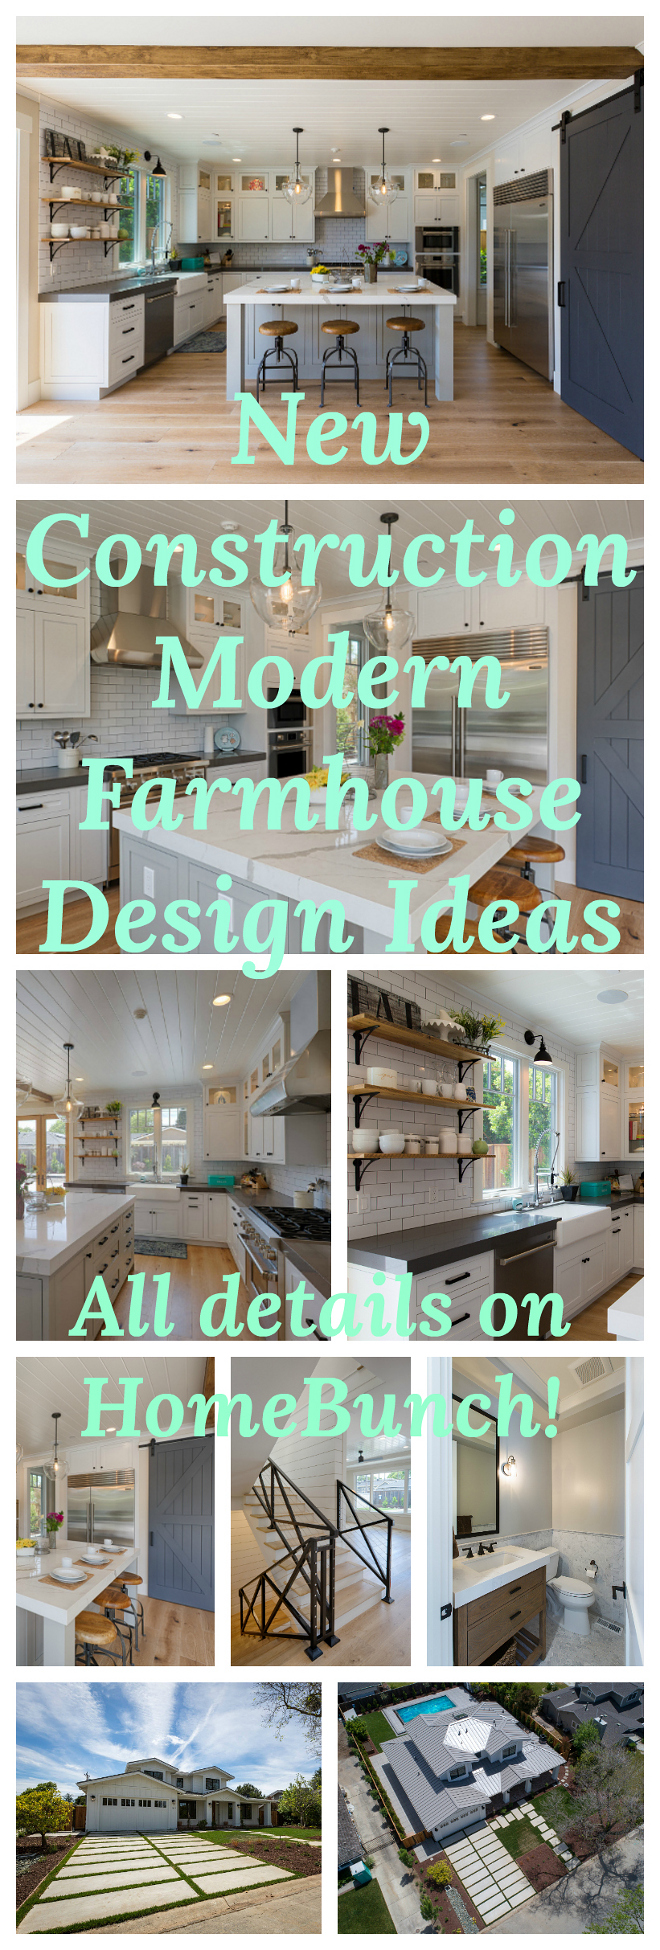 New Construction Modern Farmhouse Design Ideas. See all details and sources on Home Bunch